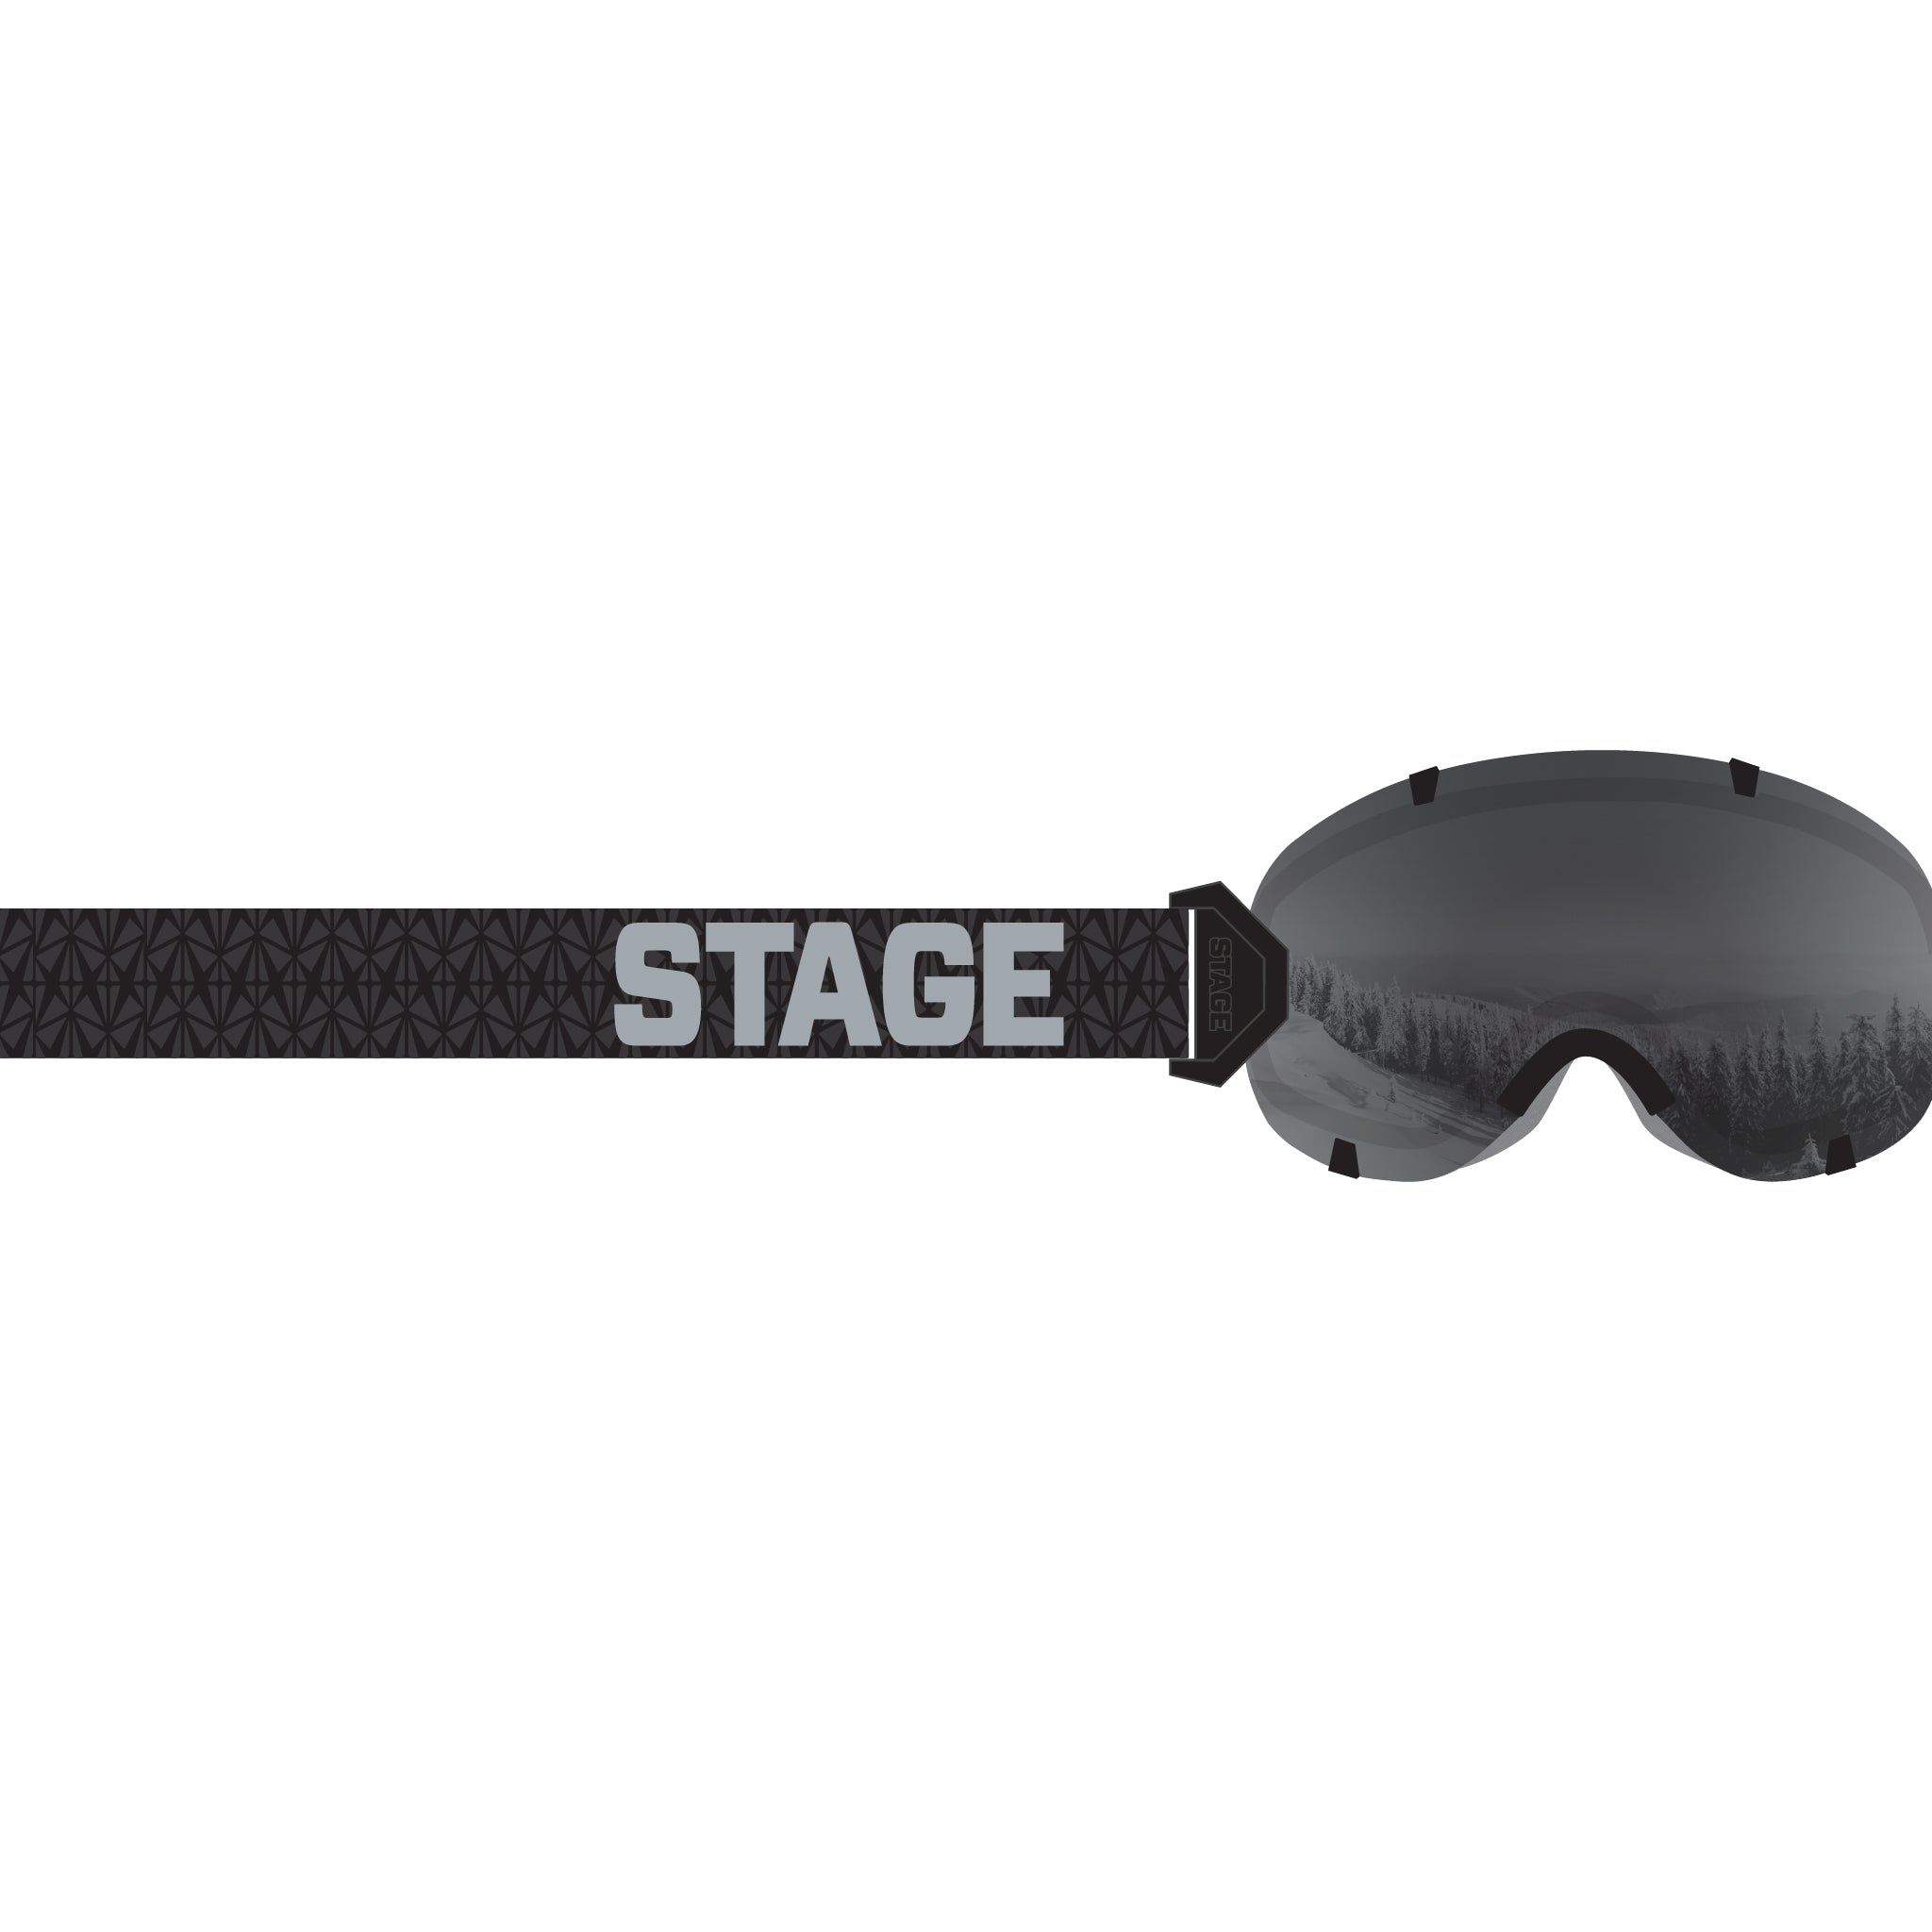 STAGE Stunt Ski Strap Lens and - Goggle - Interchangeable Black